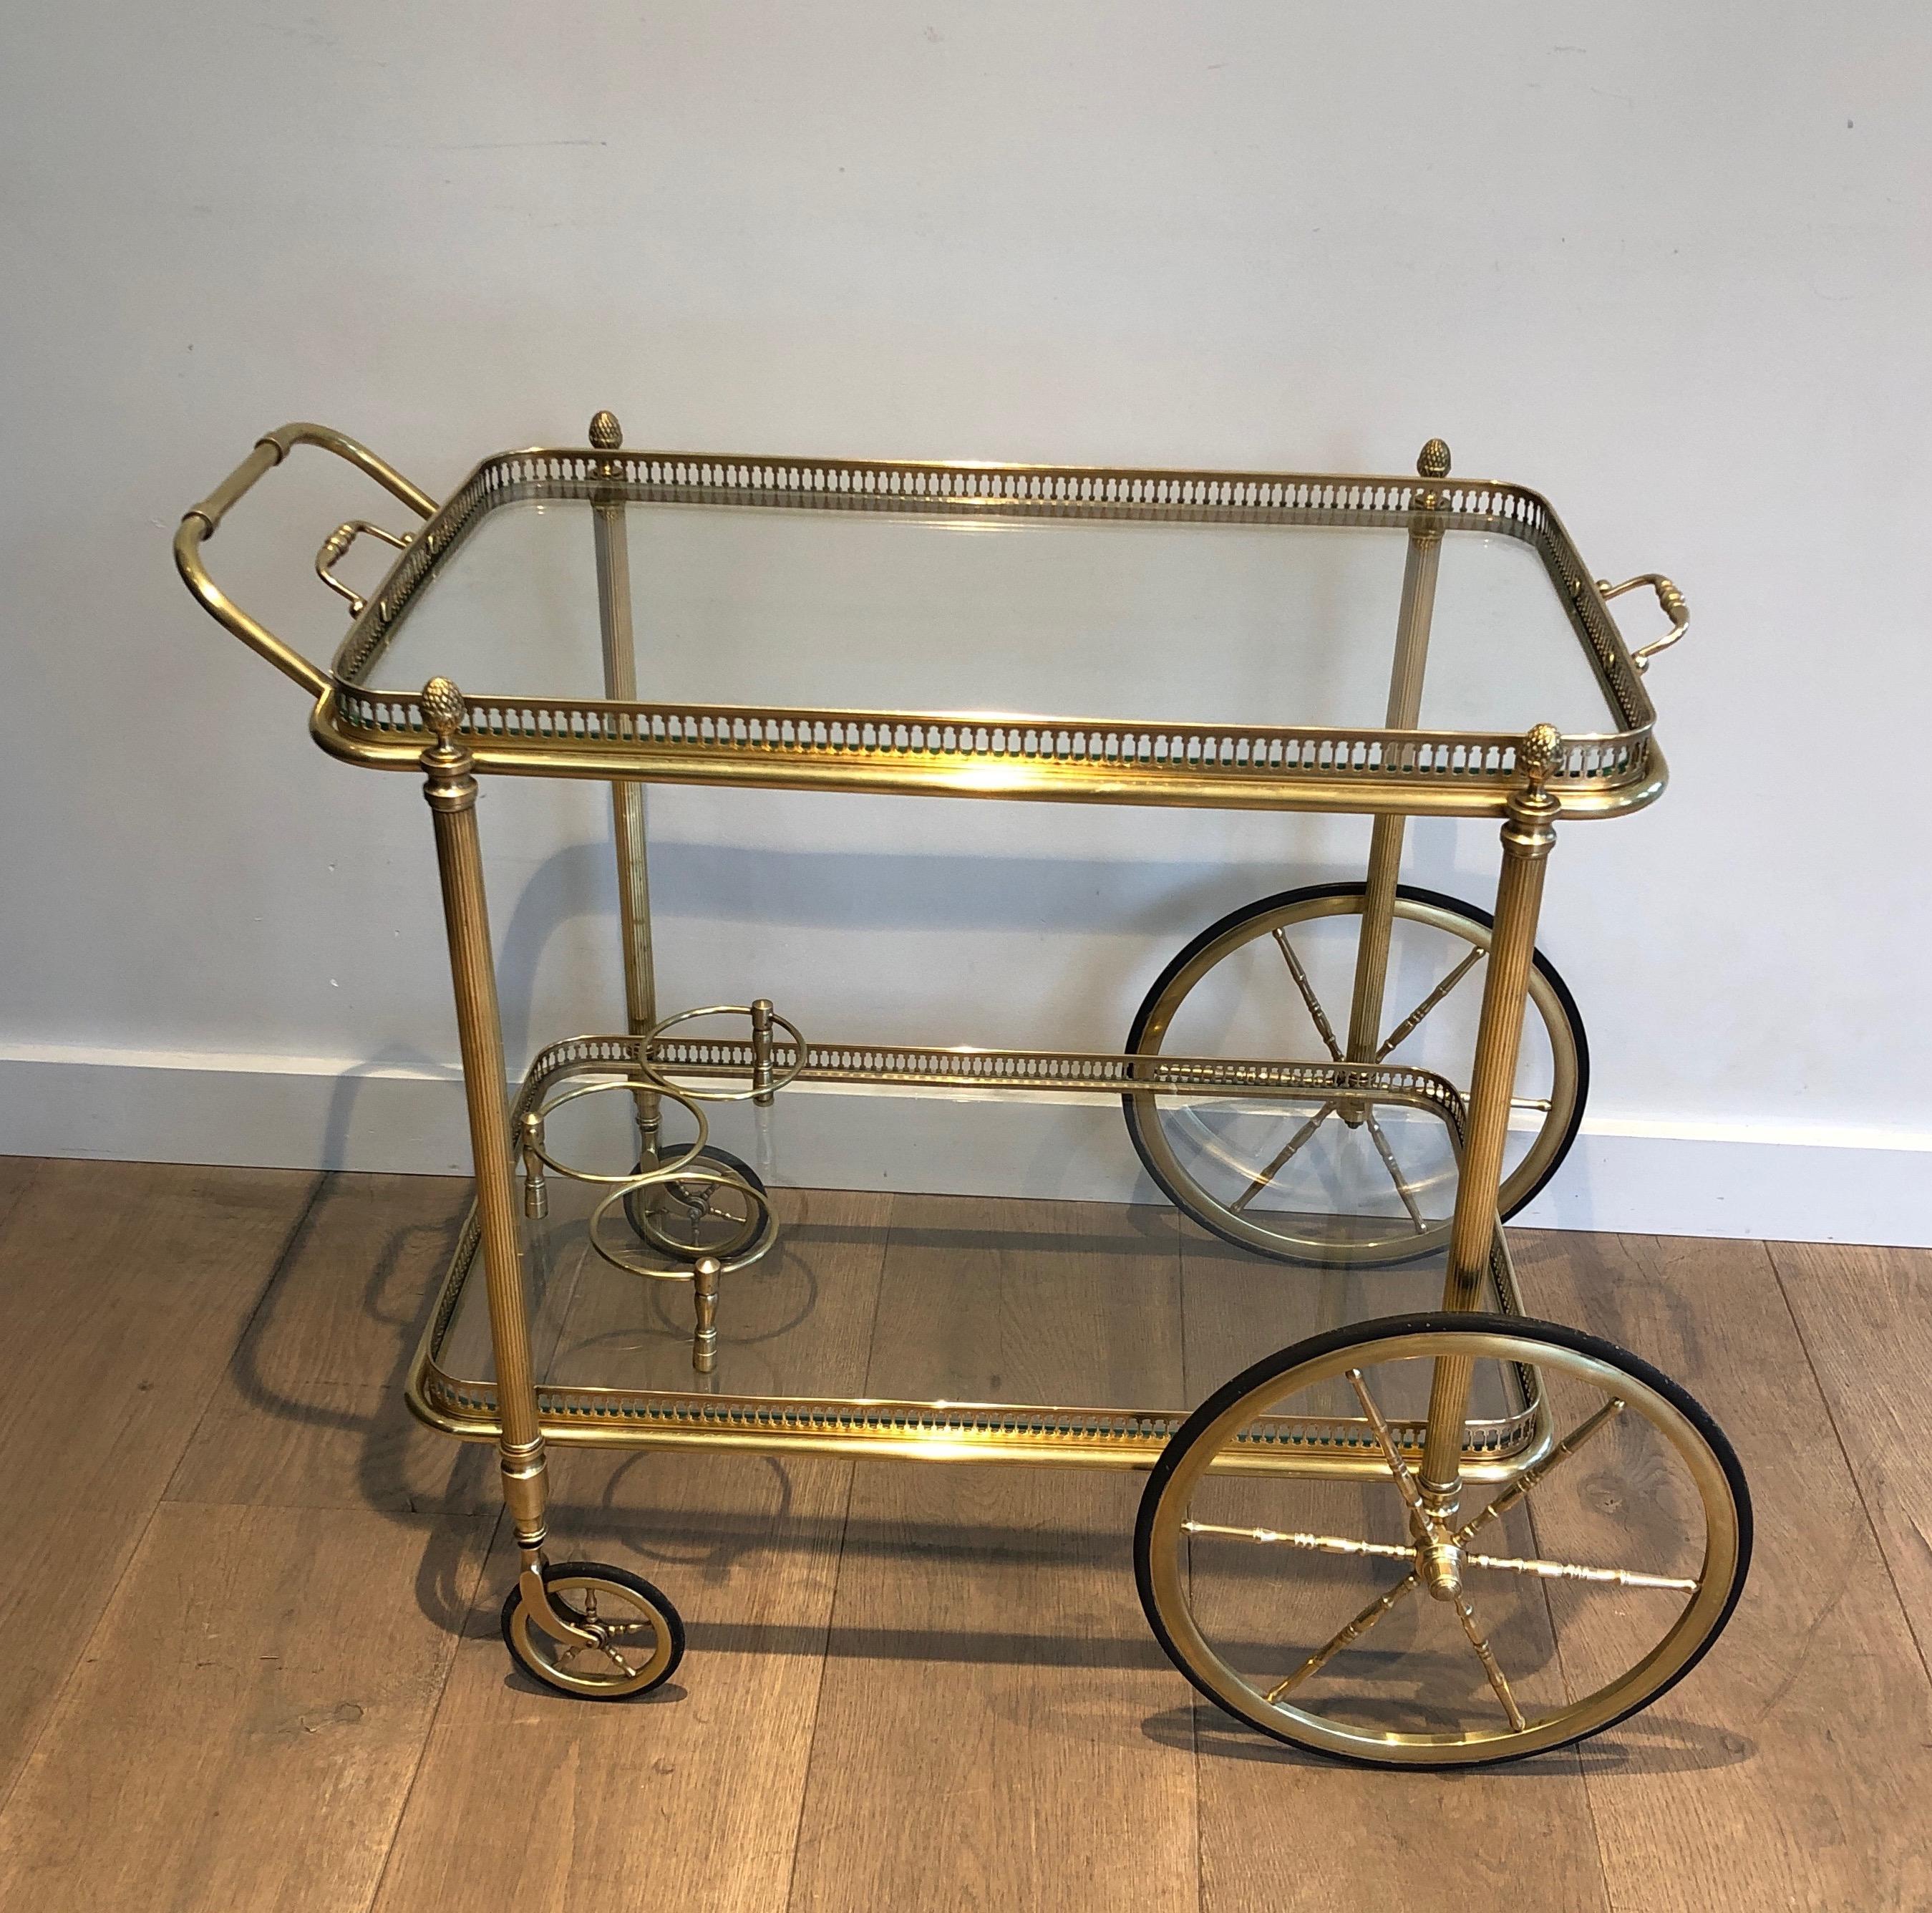 This neoclassical style bar cart is made of brass with removable glass trays. This is a French work by Maison Bagués. Circa 1940.